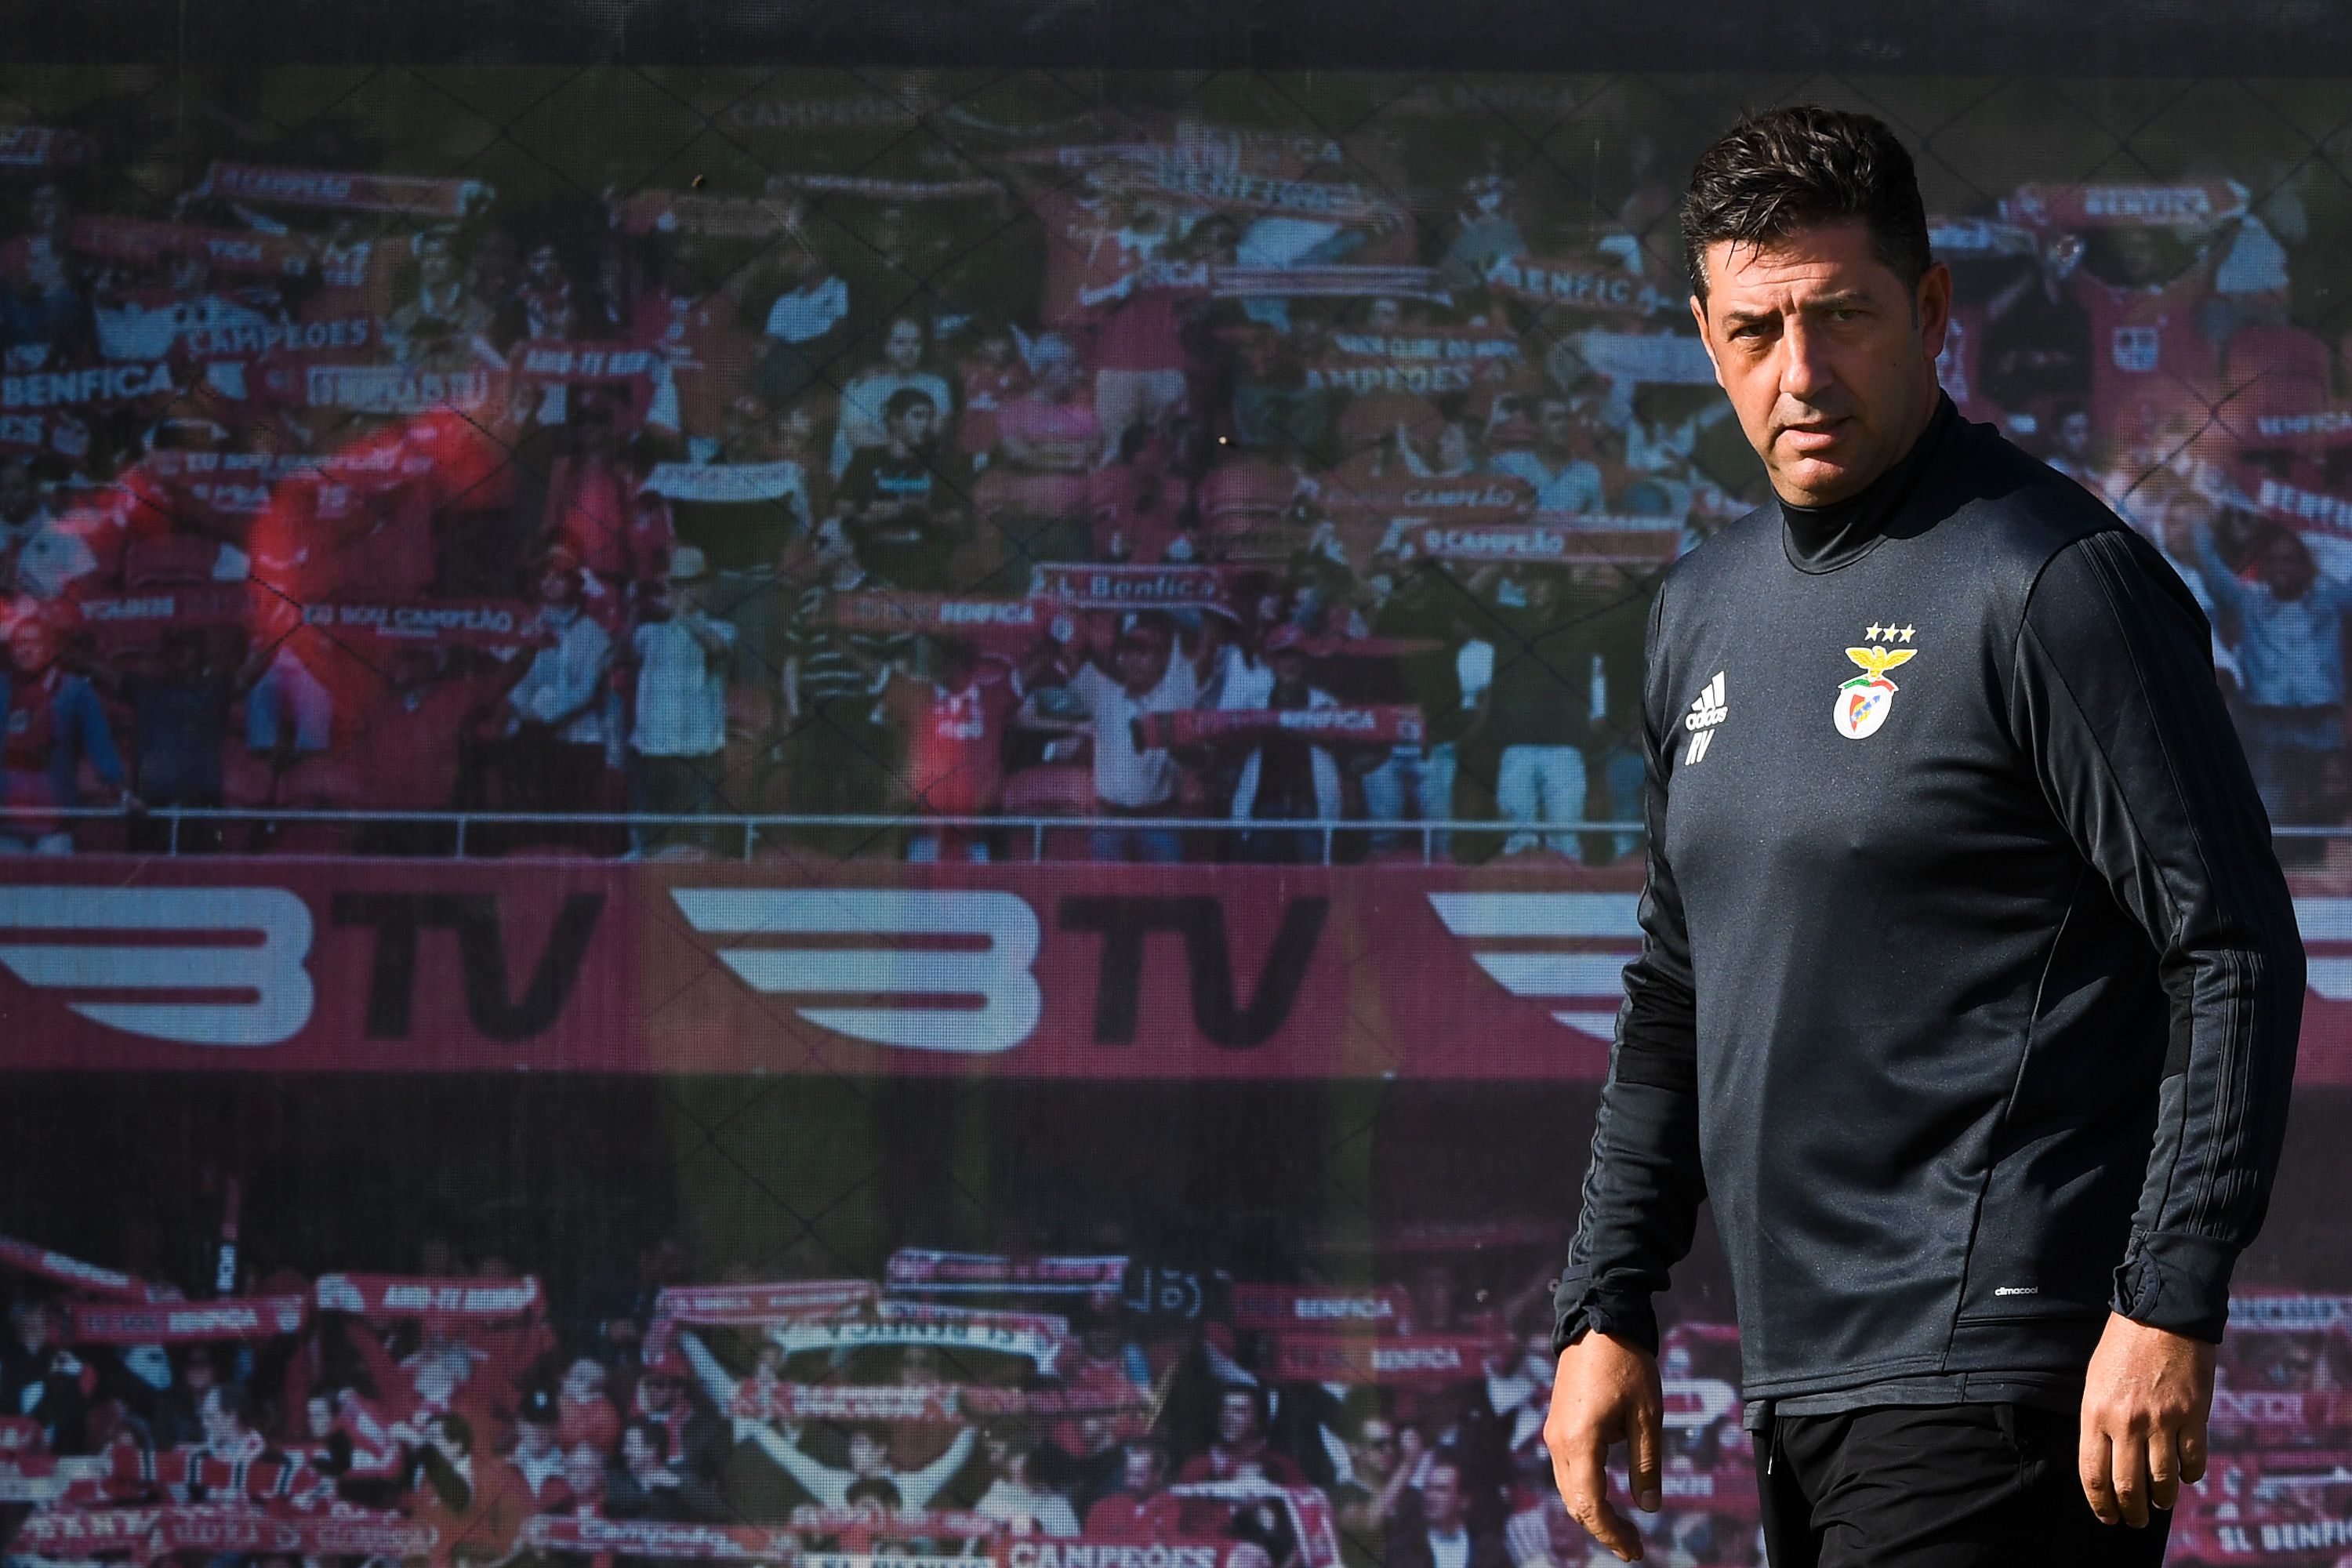 Benfica's Portuguese coach Rui Vitoria arrives for a training session at the club's training ground in Seixal in the outskirts of Lisbon on October 17, 2017 on the eve of the UEFA Champions League group A football match SL Benfica vs Manchester United. / AFP PHOTO / PATRICIA DE MELO MOREIRA        (Photo credit should read PATRICIA DE MELO MOREIRA/AFP/Getty Images)